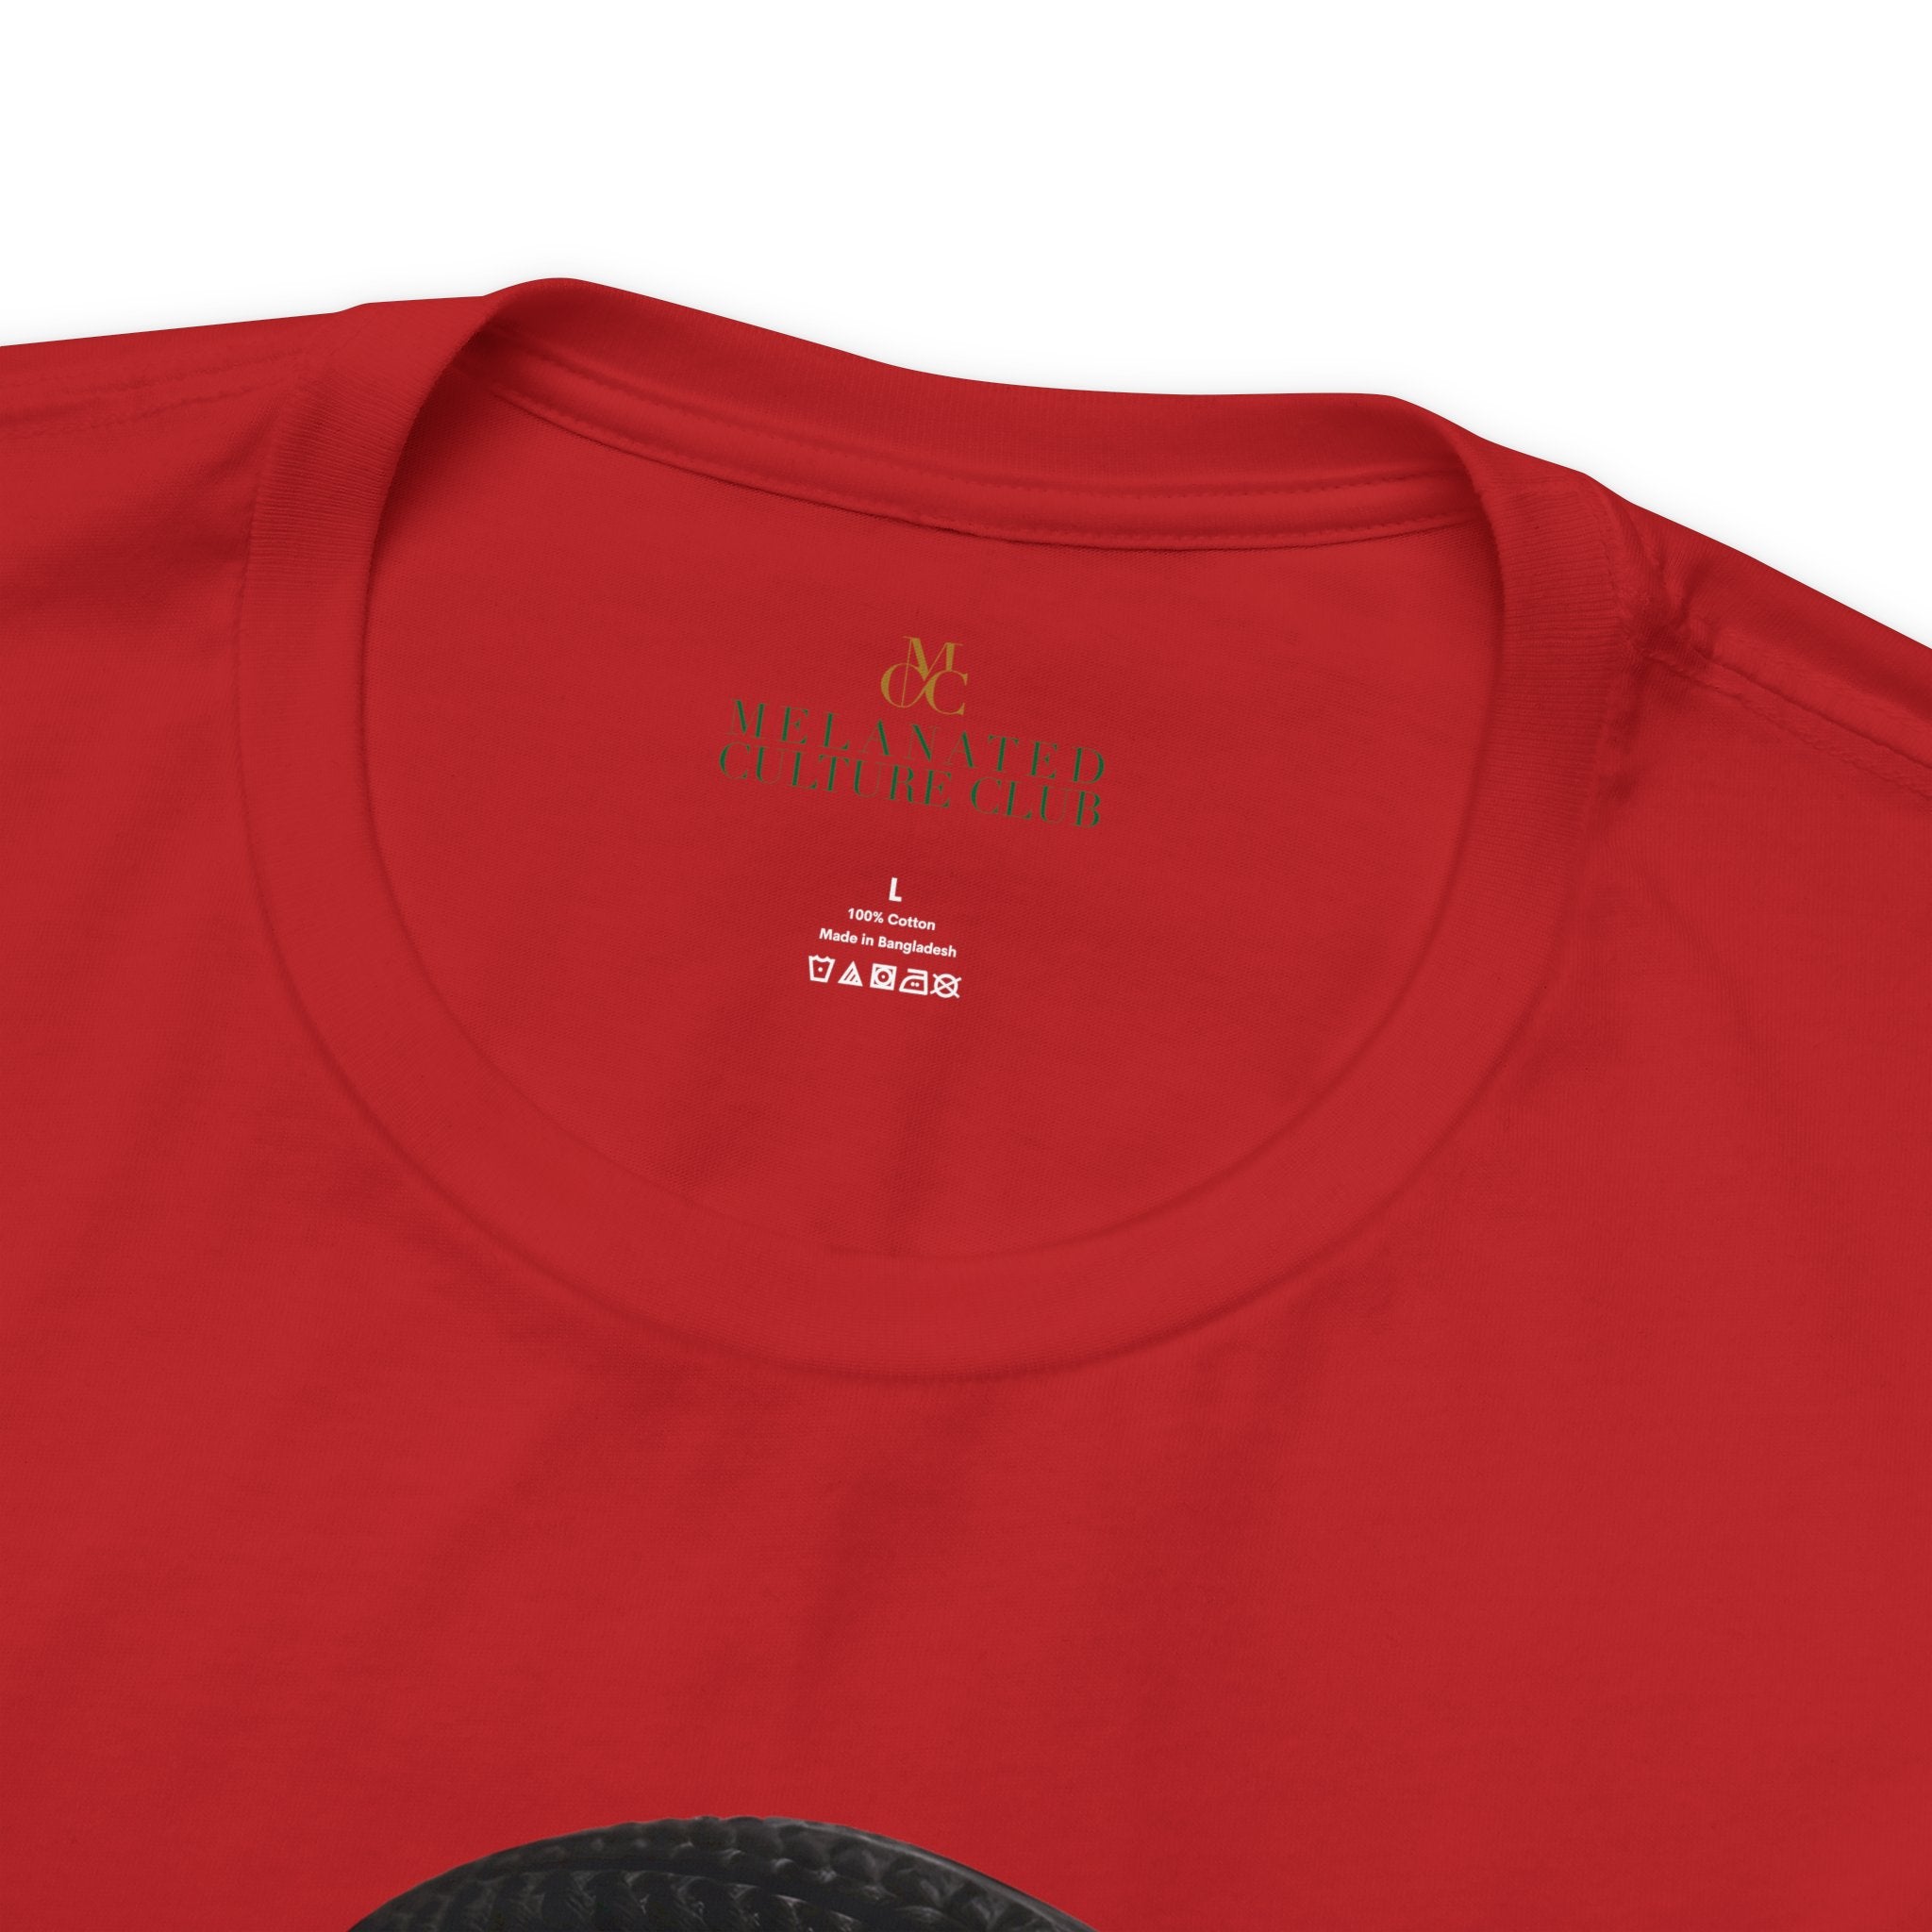 Inside logo label on Afrocentric Black Beauty tee shirt in red.